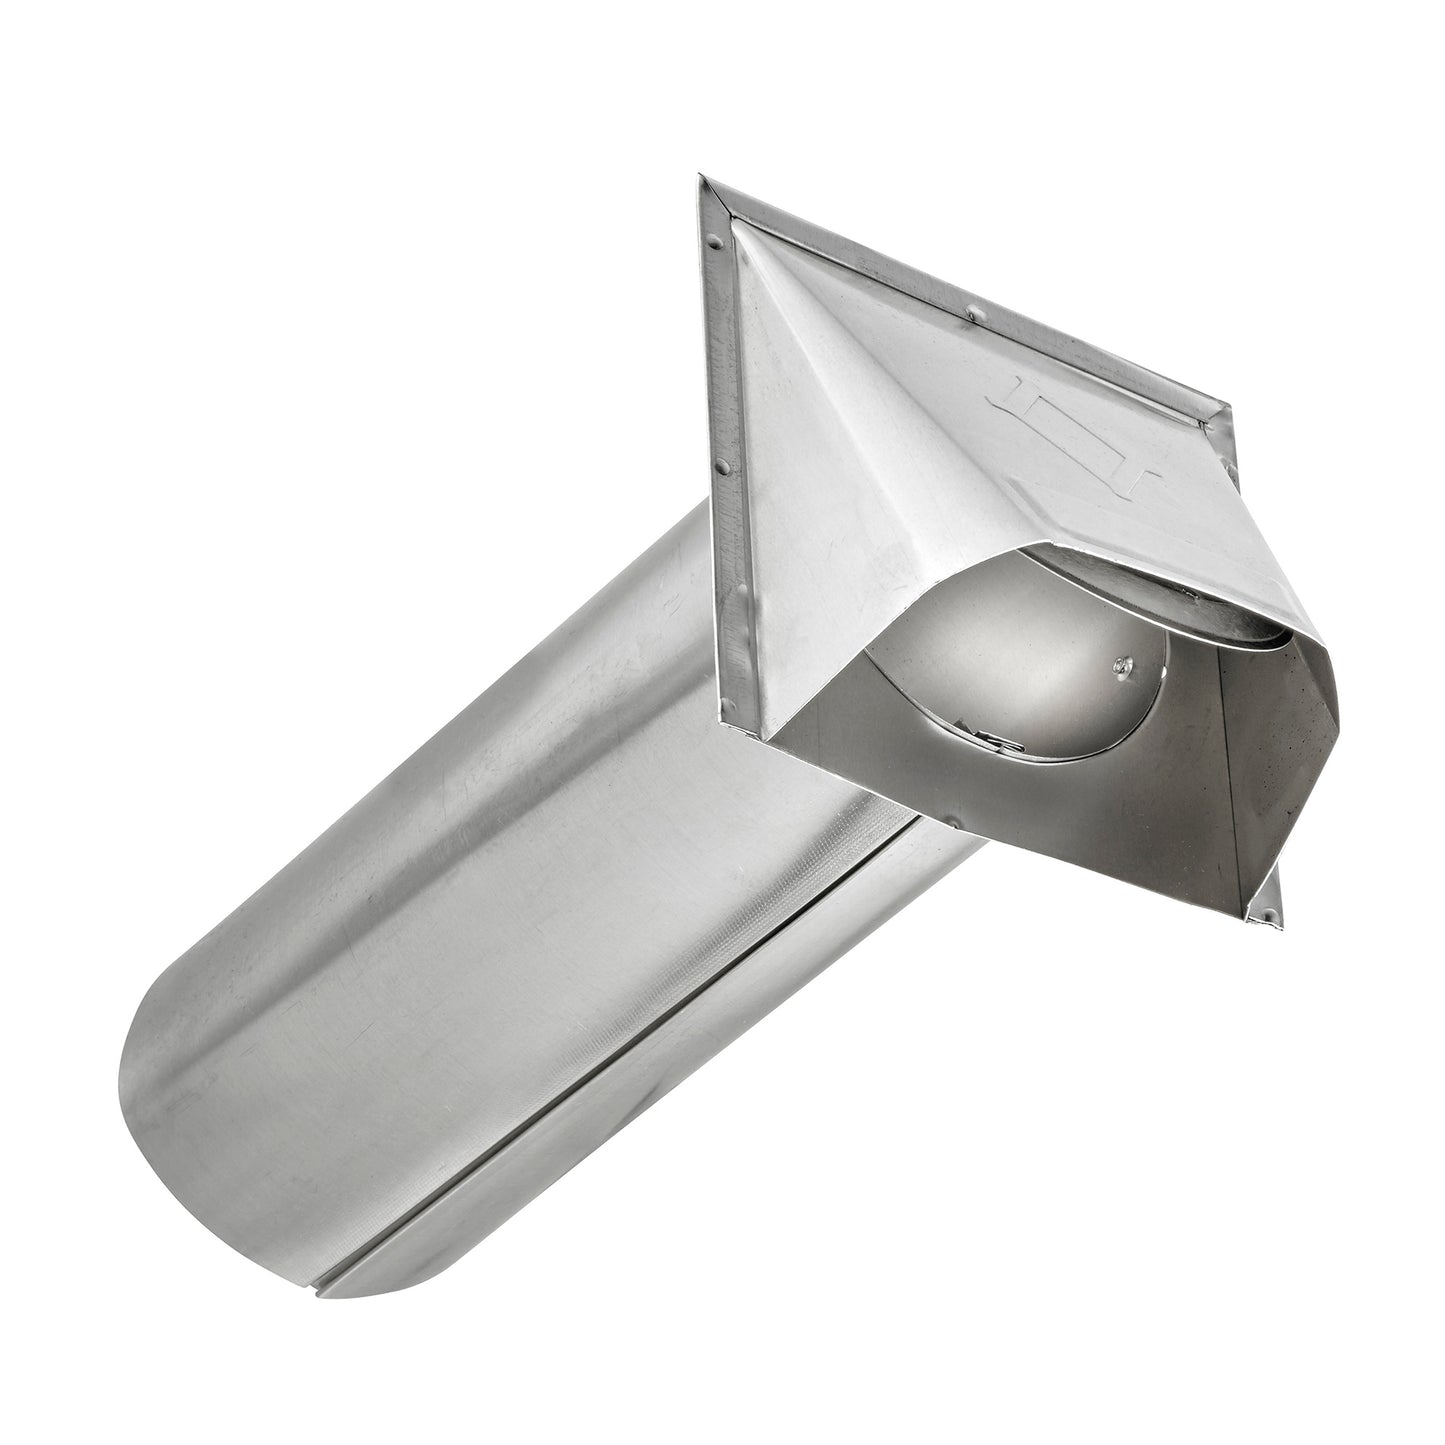 544 - 4" Aluminum Preferred Hood Wall Vent with Tail Pipe